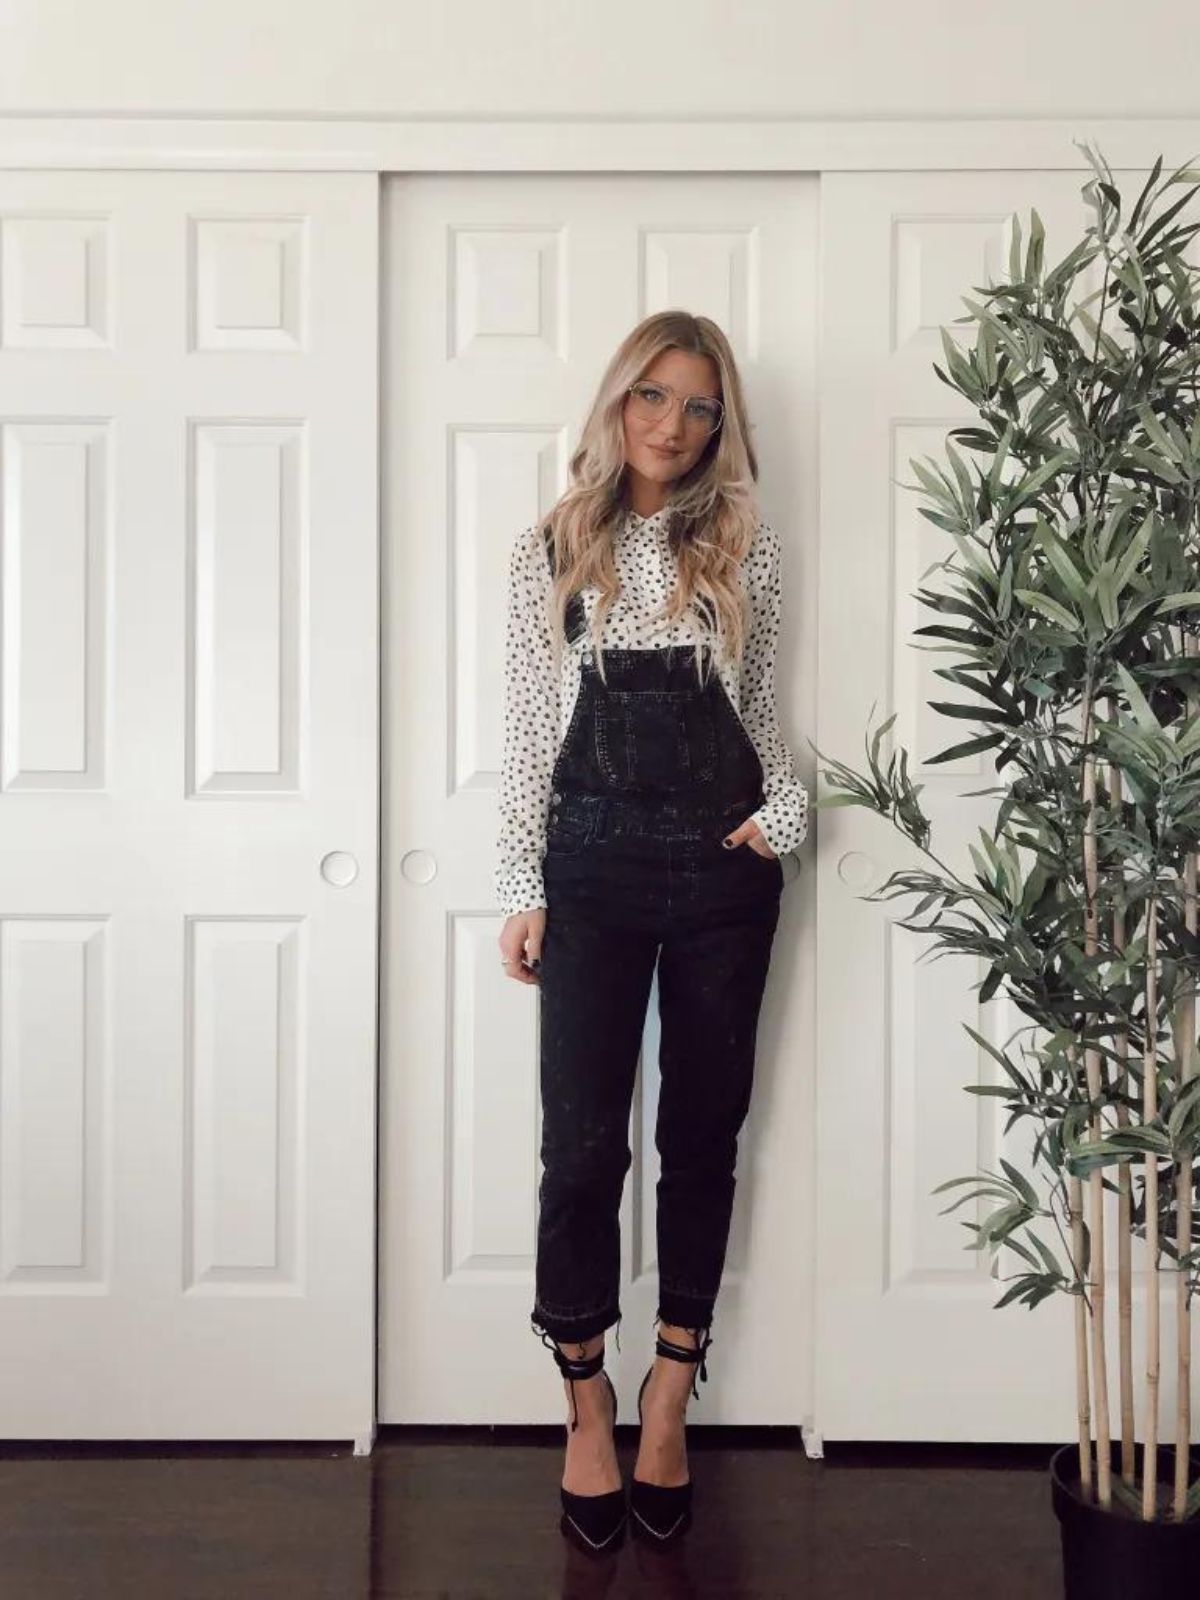 styling black overalls with polka dot shirt